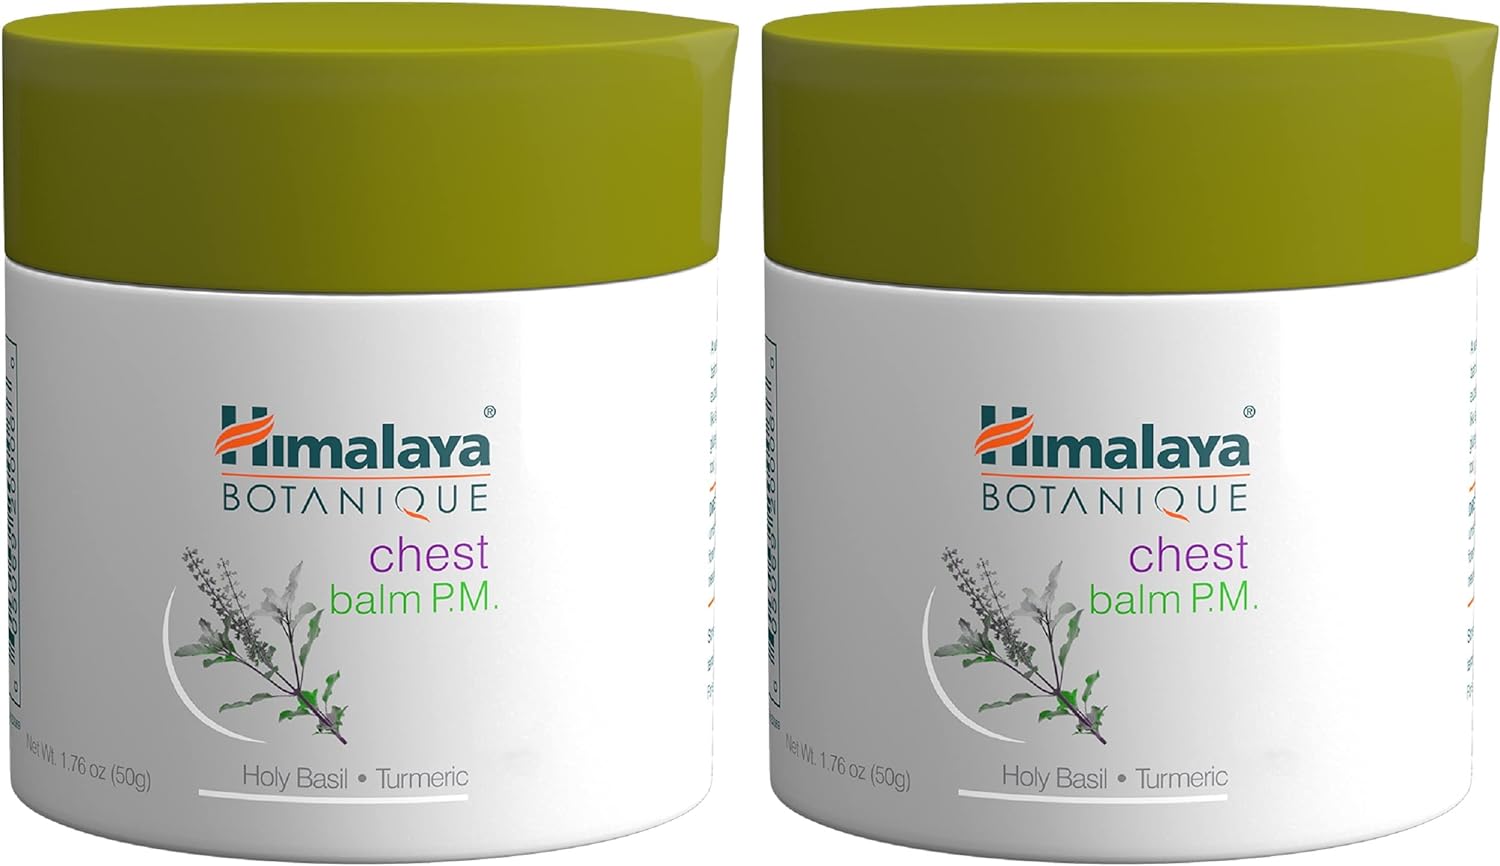 Himalaya Botanique Chest Balm P.M., Soothing, Calming and Co